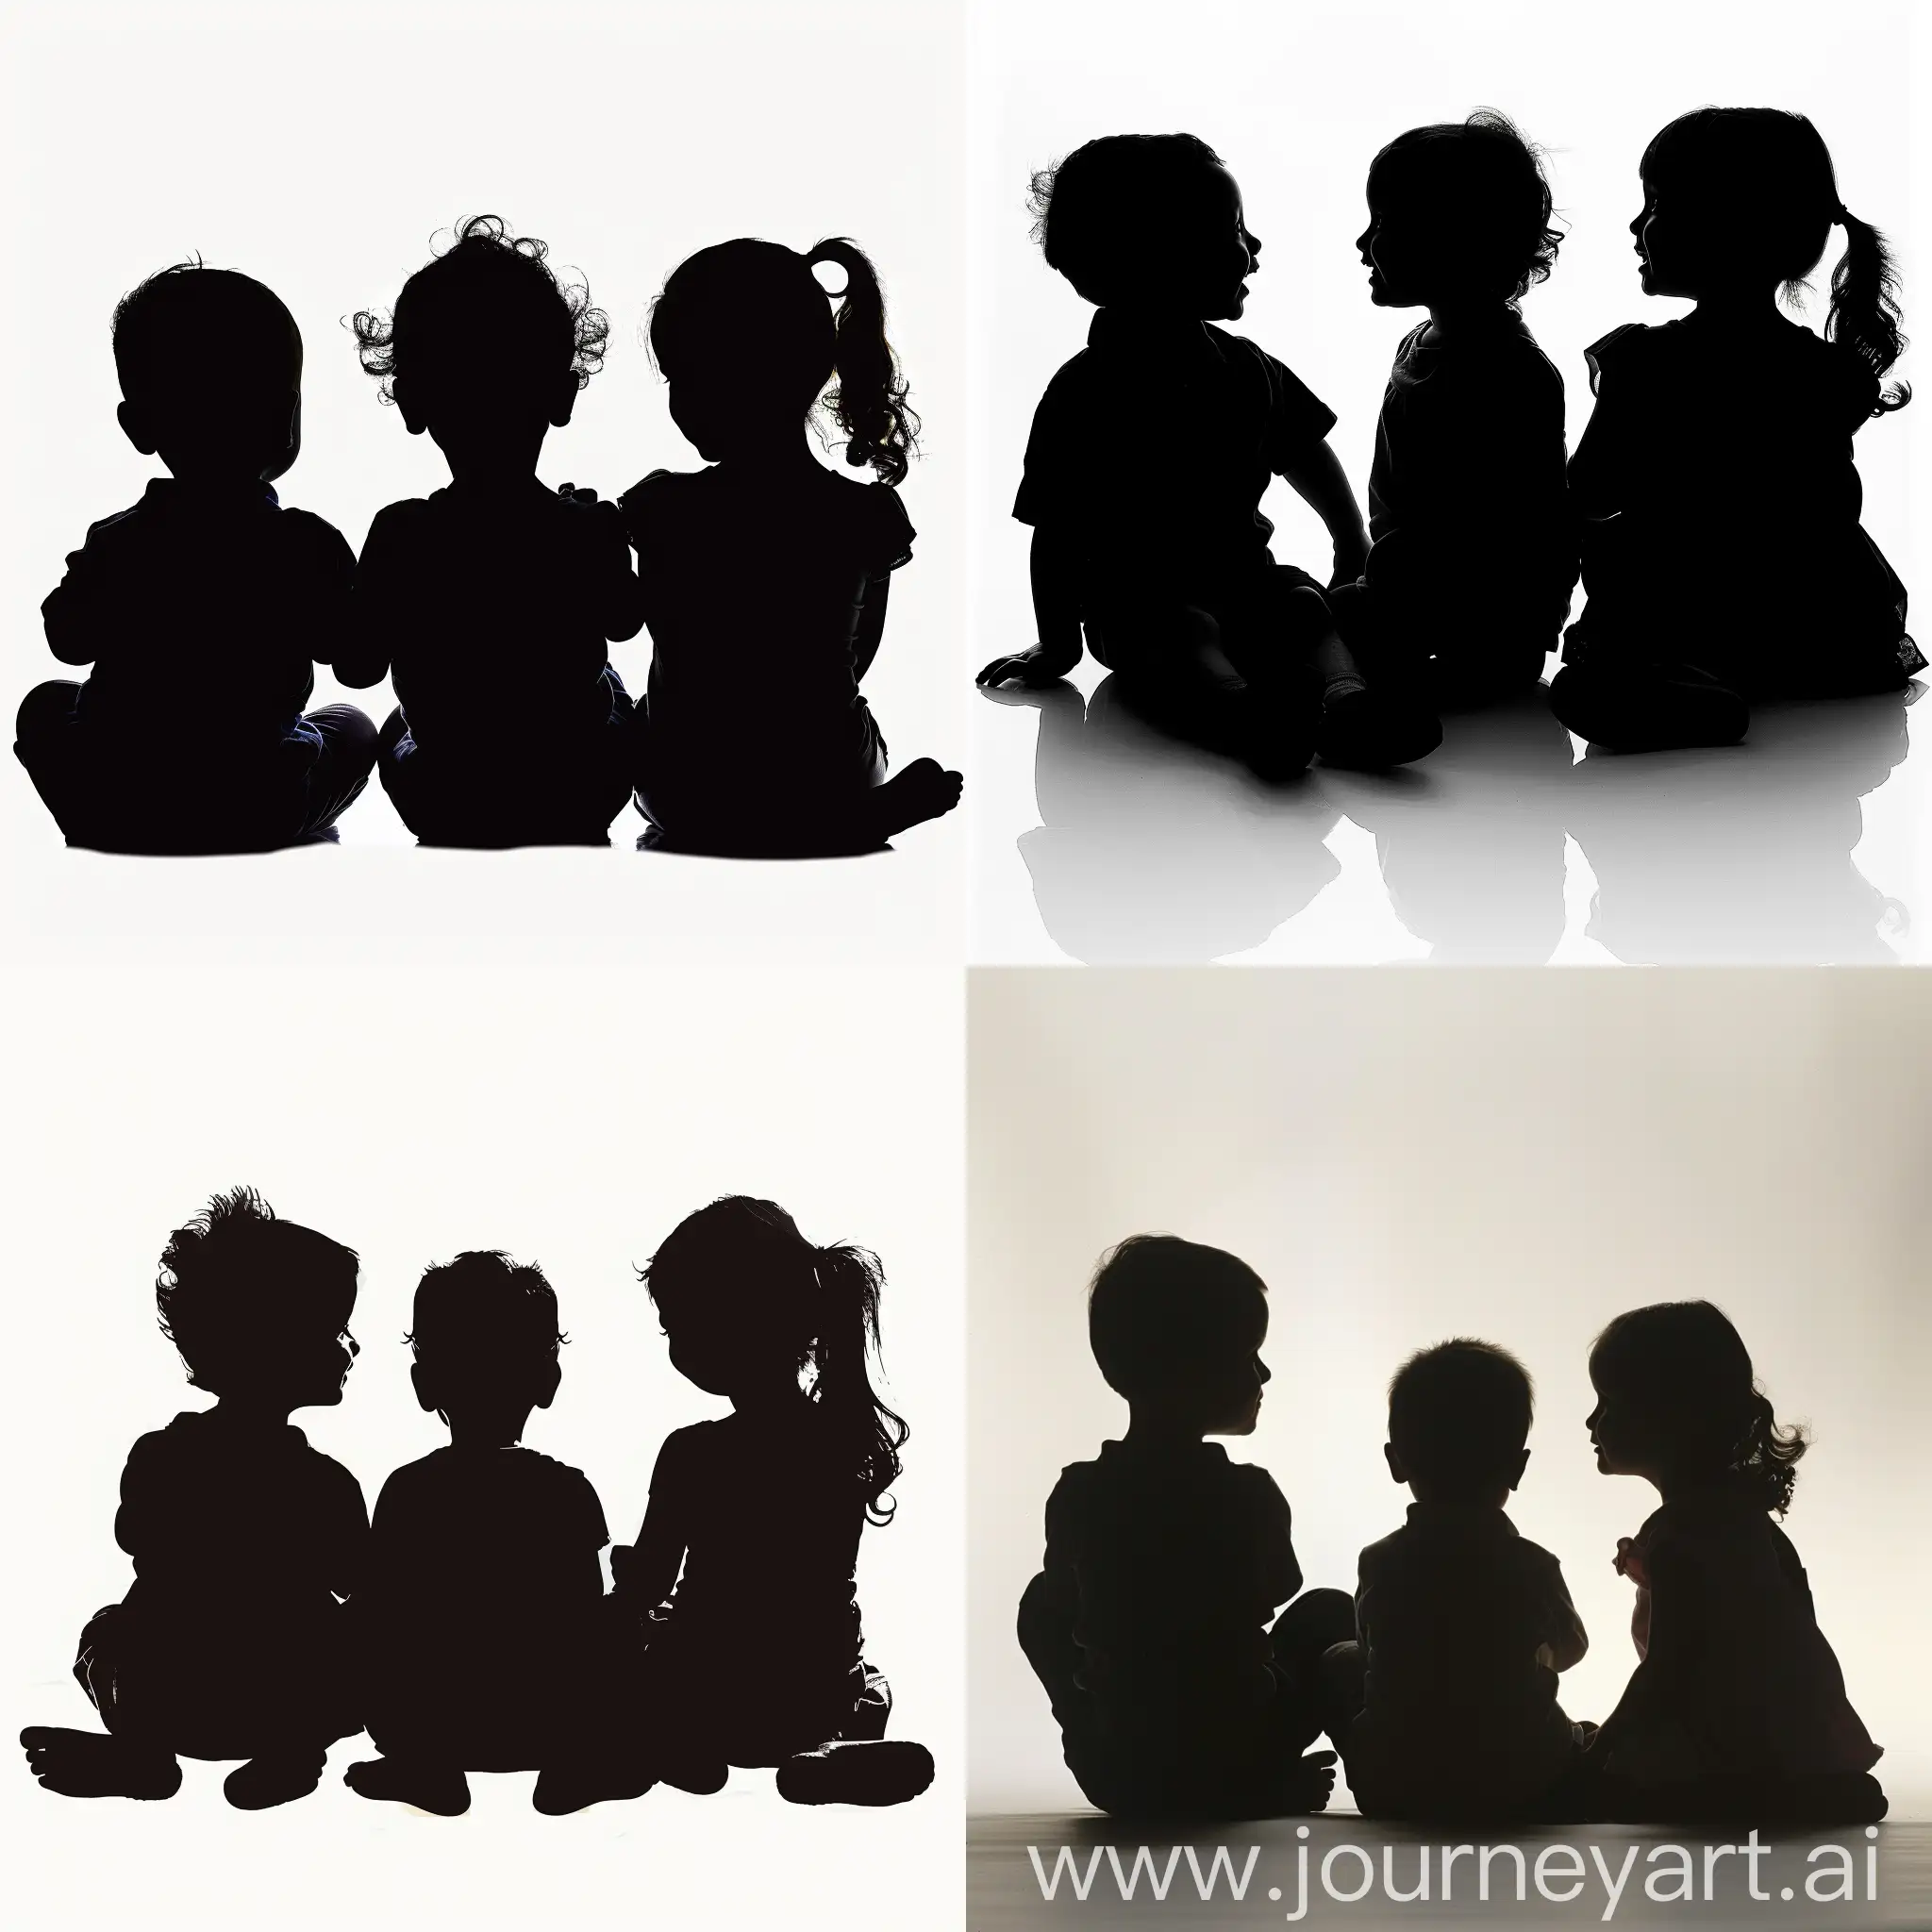 silhouette of 3 children sitting down side by side a young boy age 2 a young girl age 4 and a young girl age 7